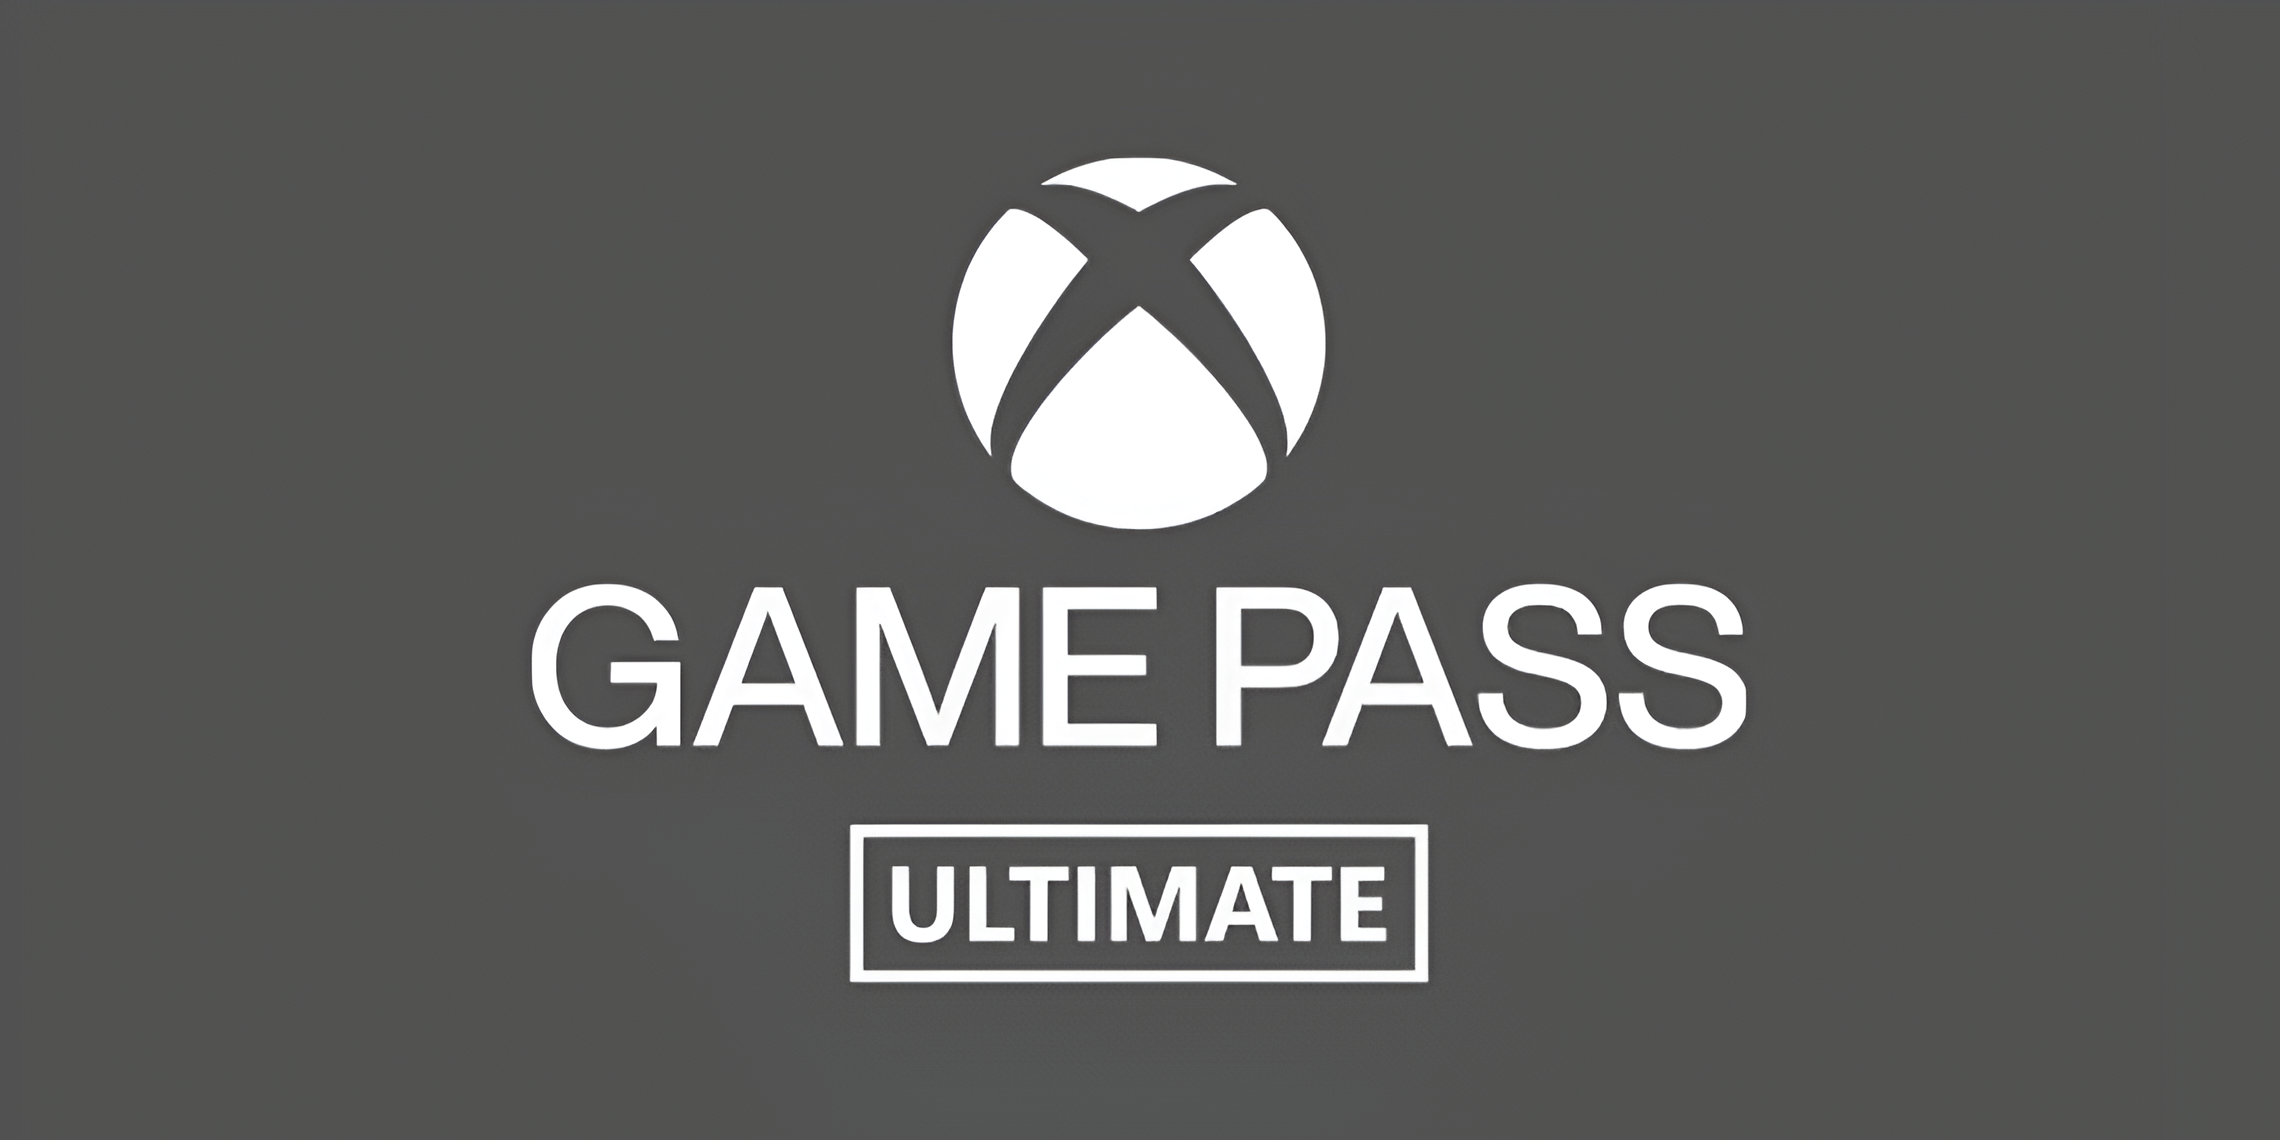 xbox-game-pass-ultimate-logo (1)